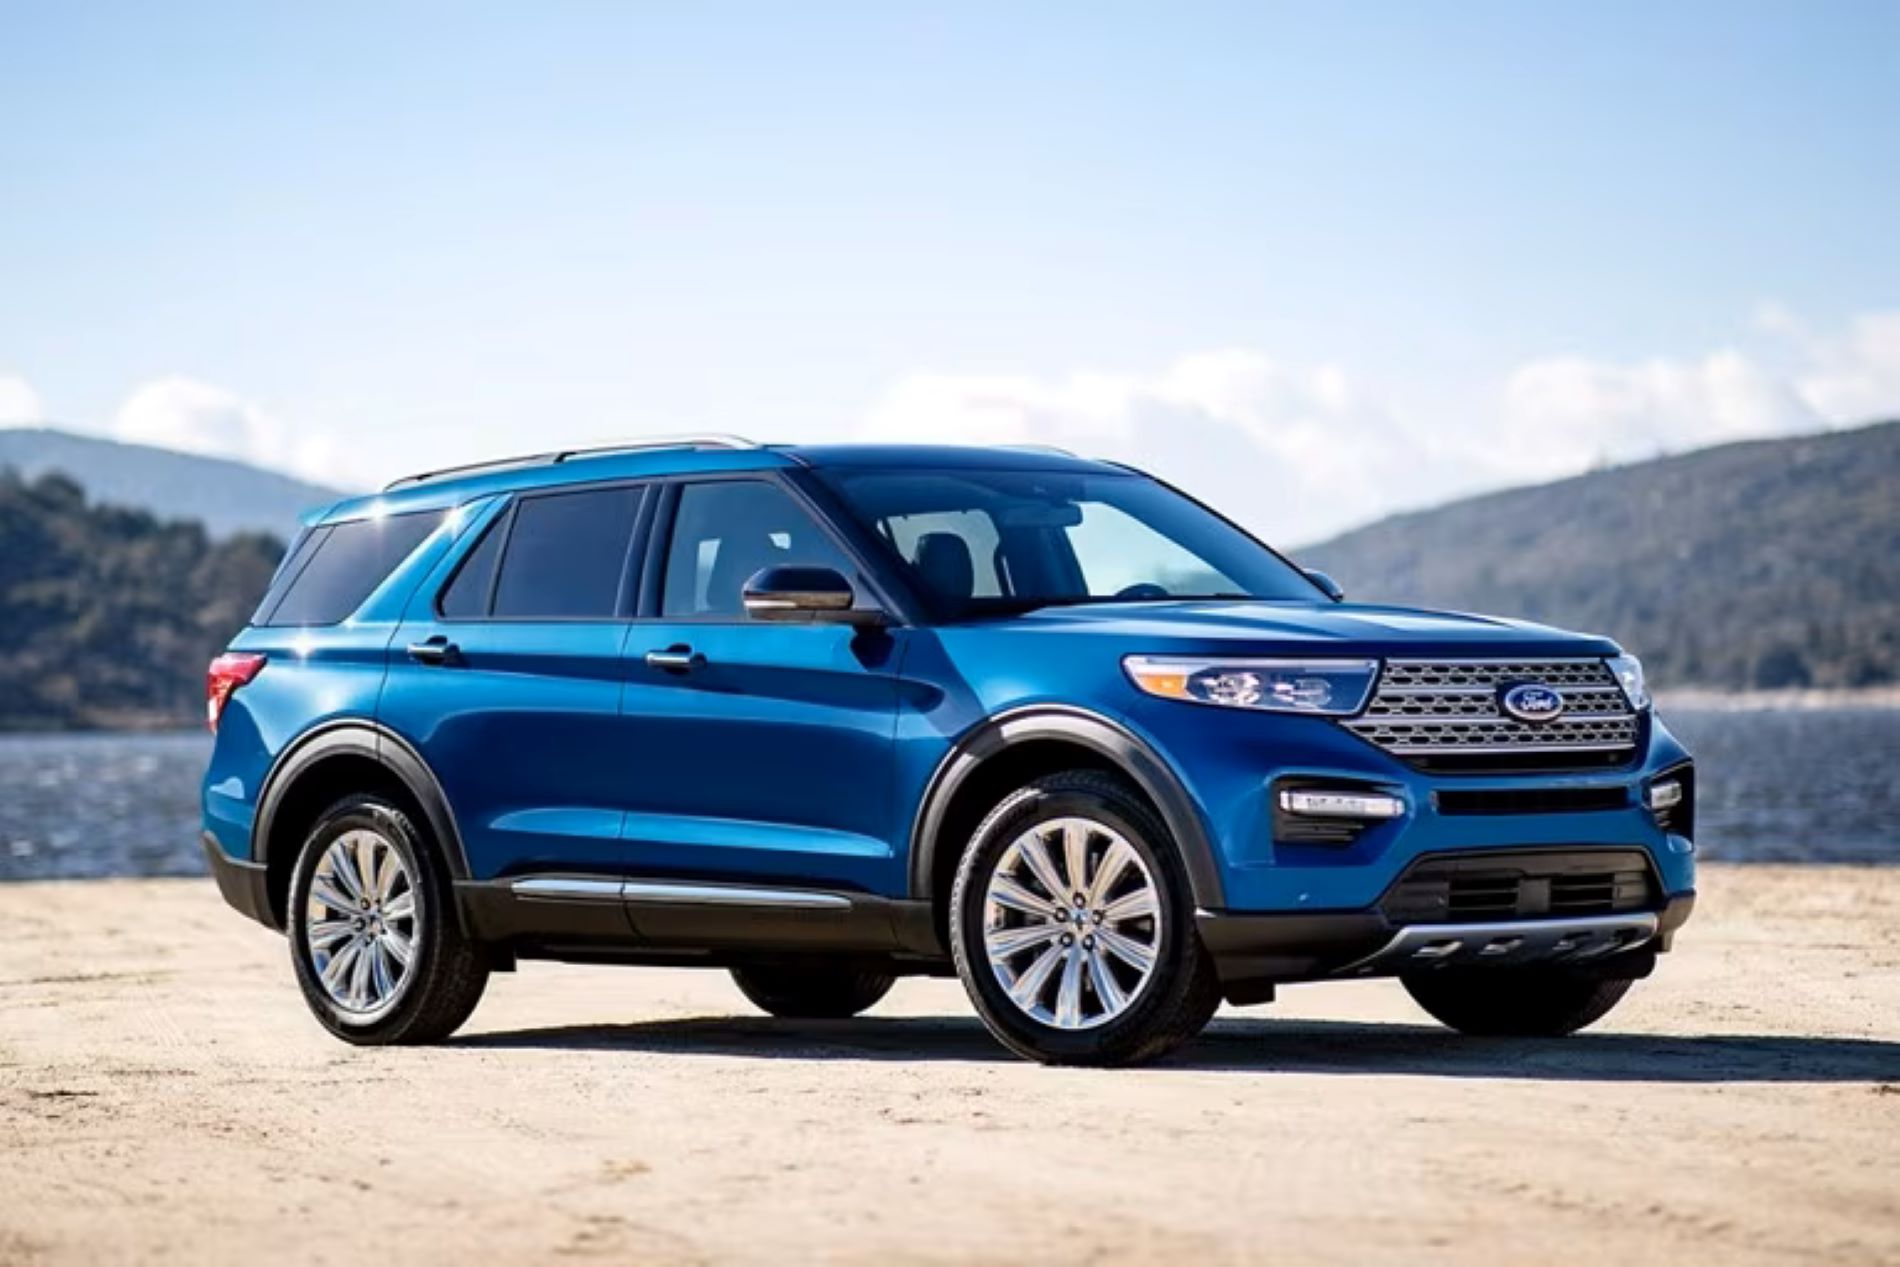 The Ford Explorer Limited models include twin panel moonroof, rear auxiliary climate control, premium Audio System, third row seats, power front passenger's seat, and push button start.